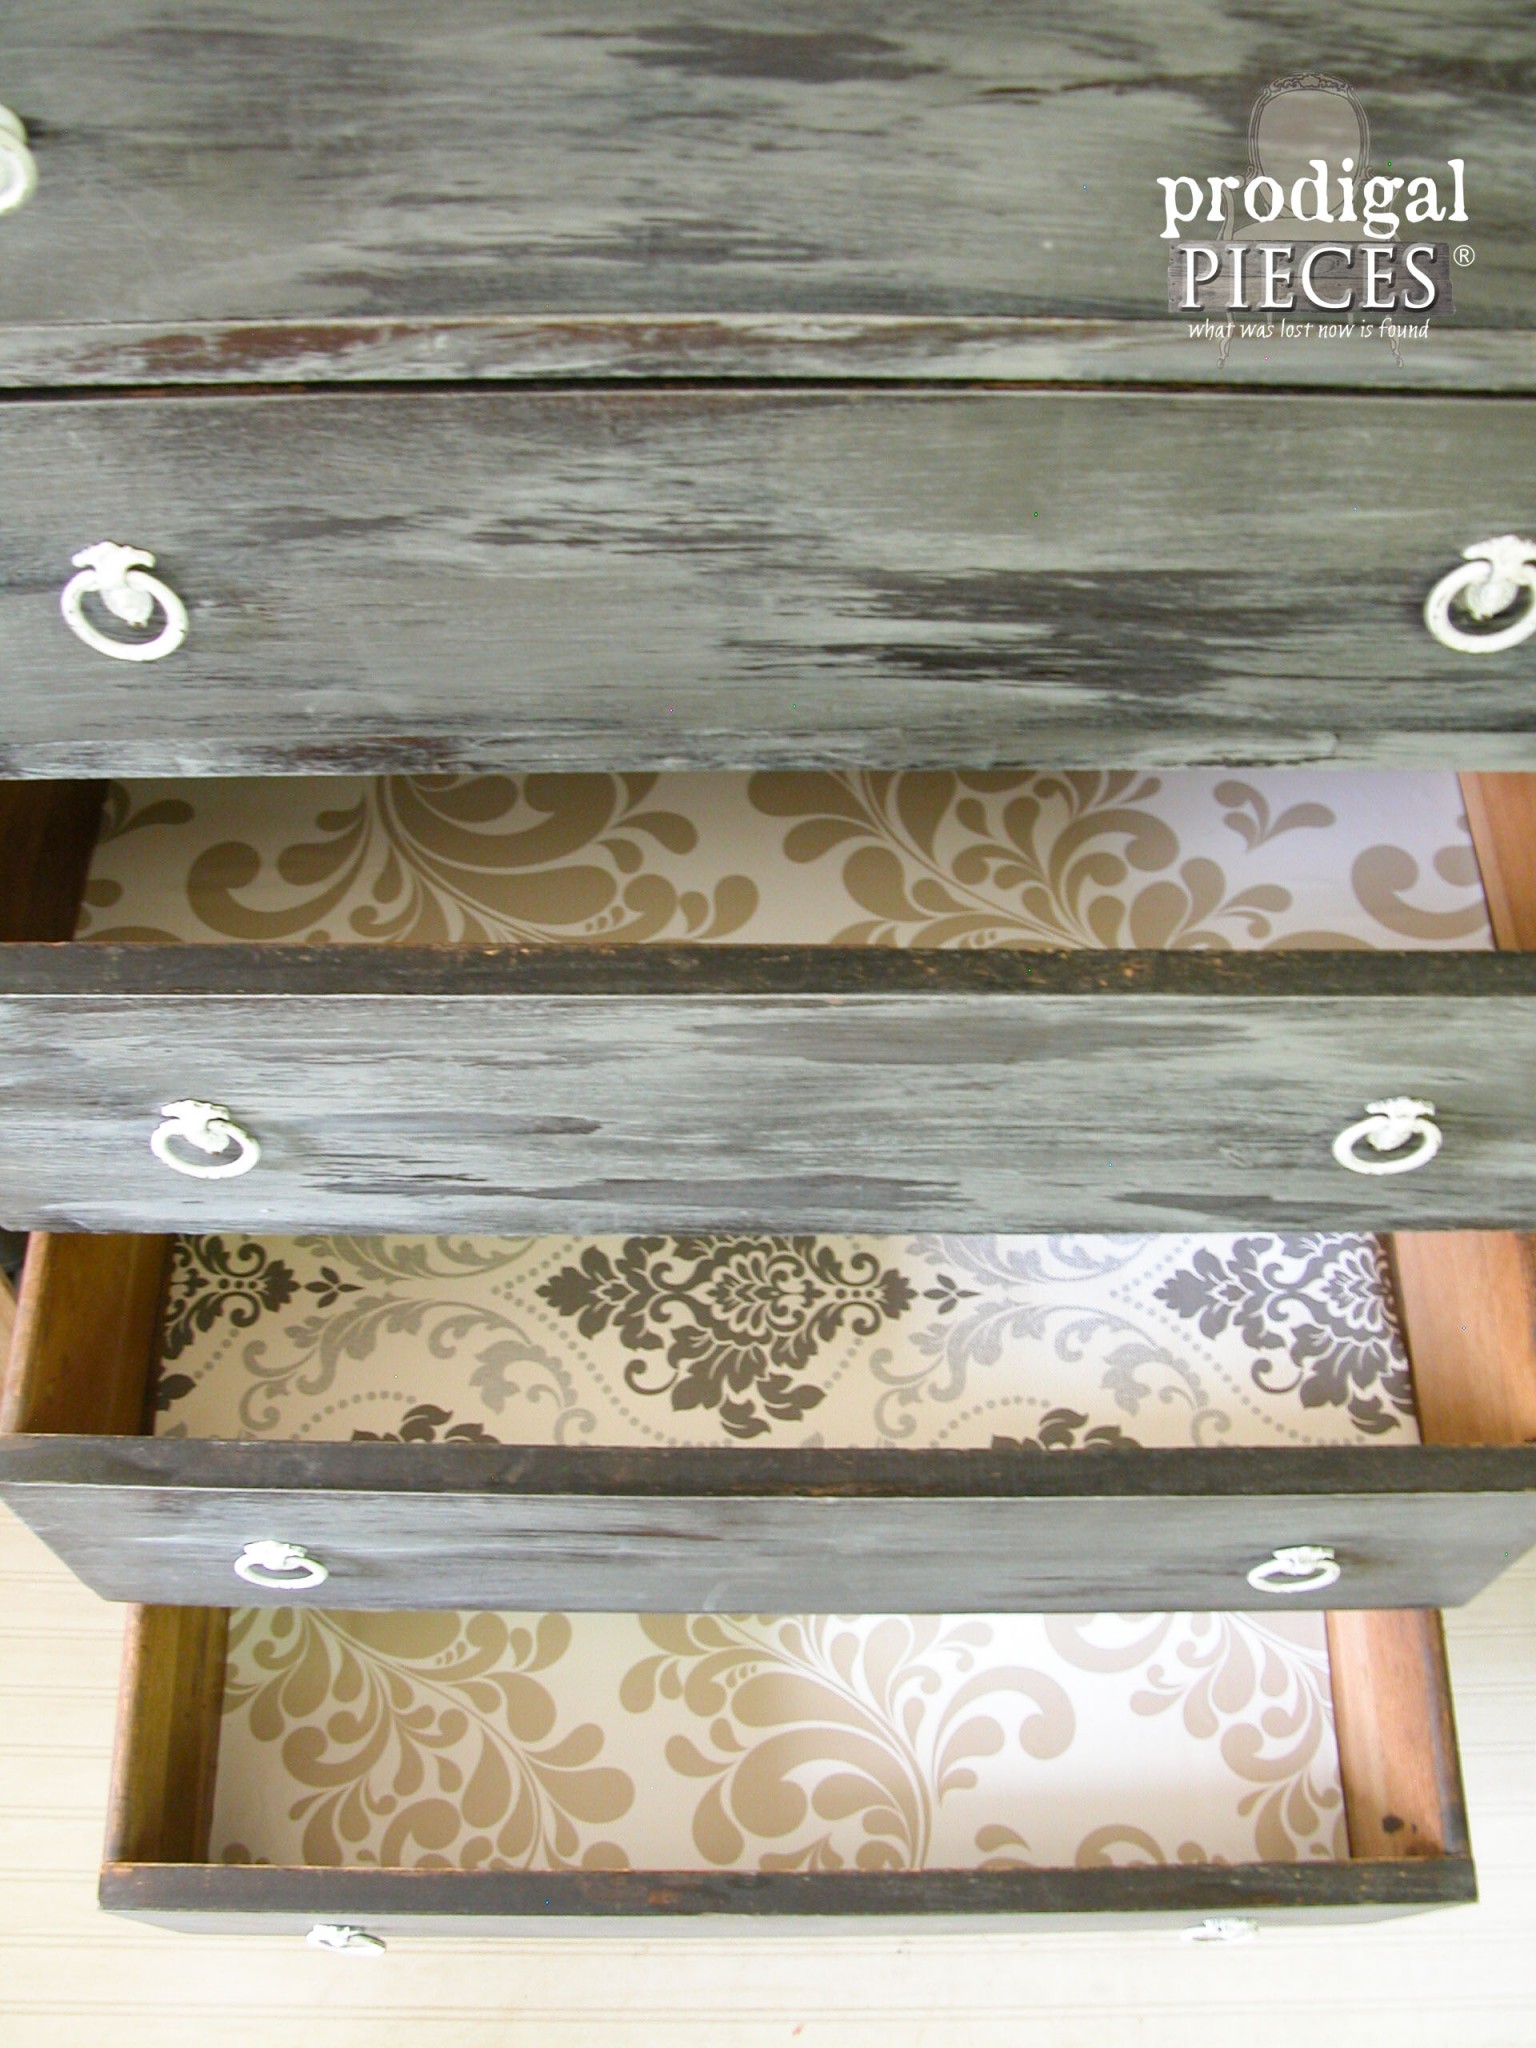 Chest of Drawers Lined with Wallpaper for Fun Contrast by Prodigal Pieces | www.prodigalpieces.com